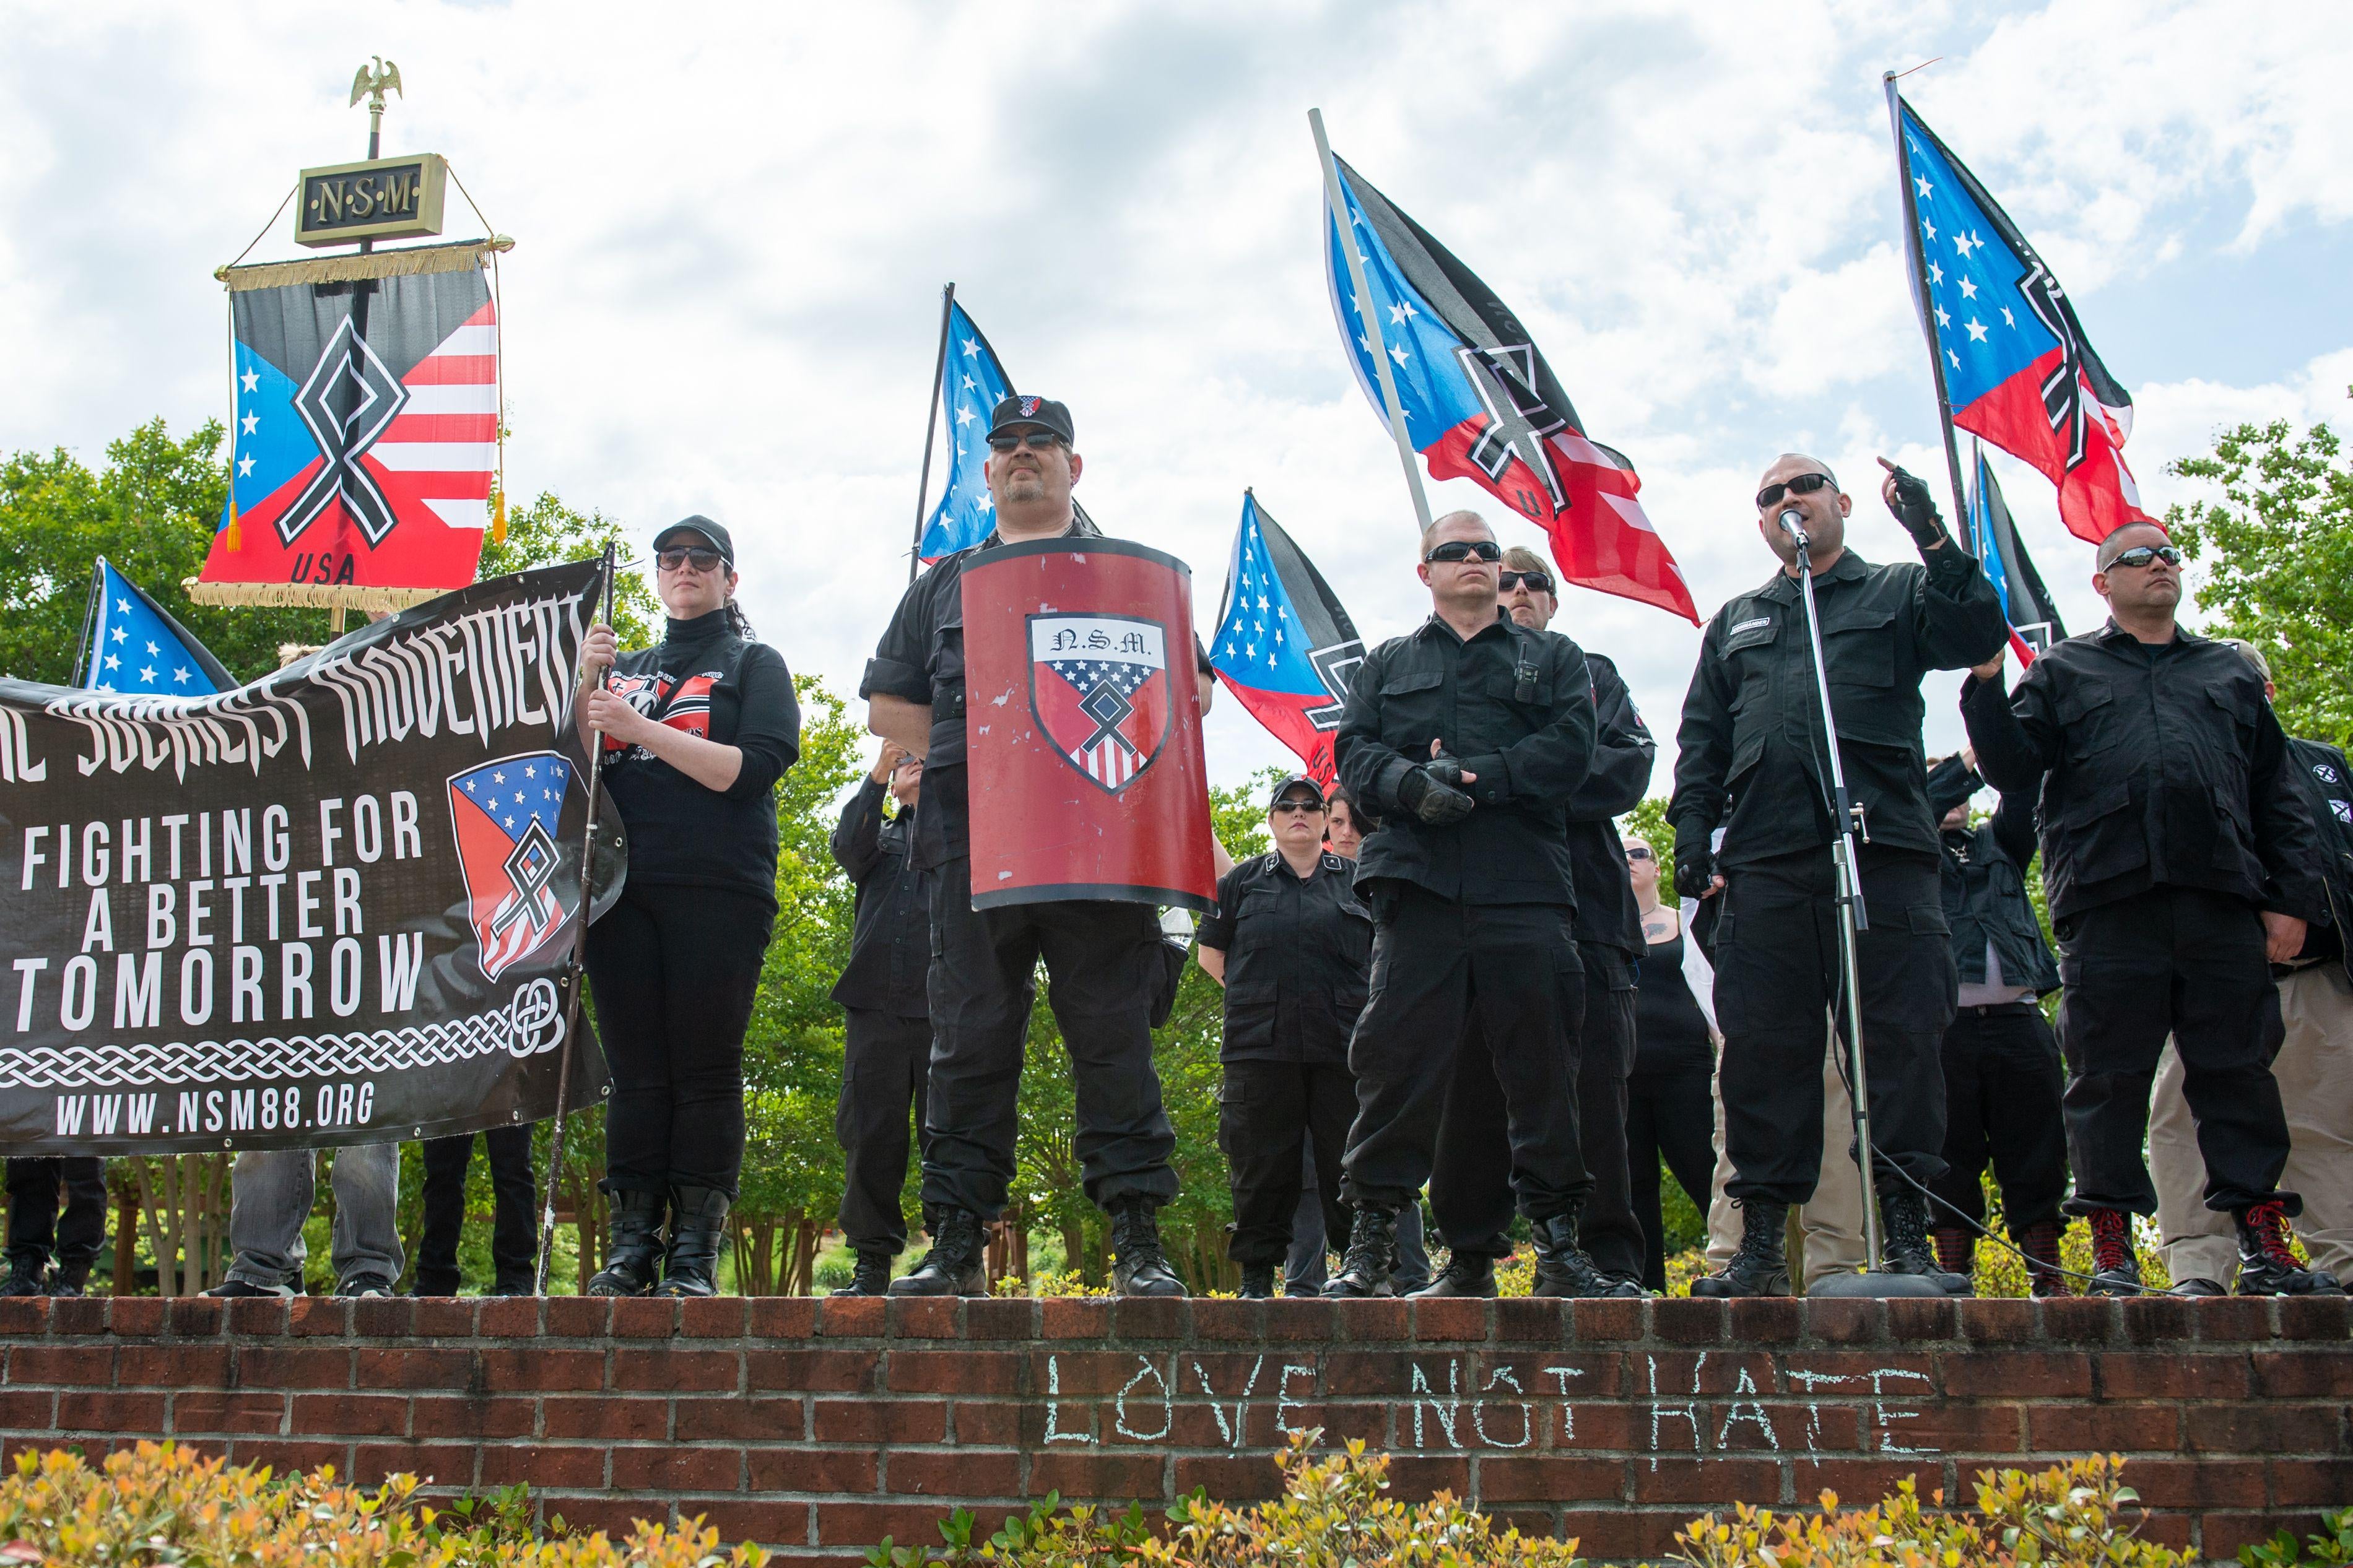 National Socialist Movement leader Jeff Schoep (2nd R) speaks during a white nationalist rally in Newnan, Georgia on April 21, 2018. 